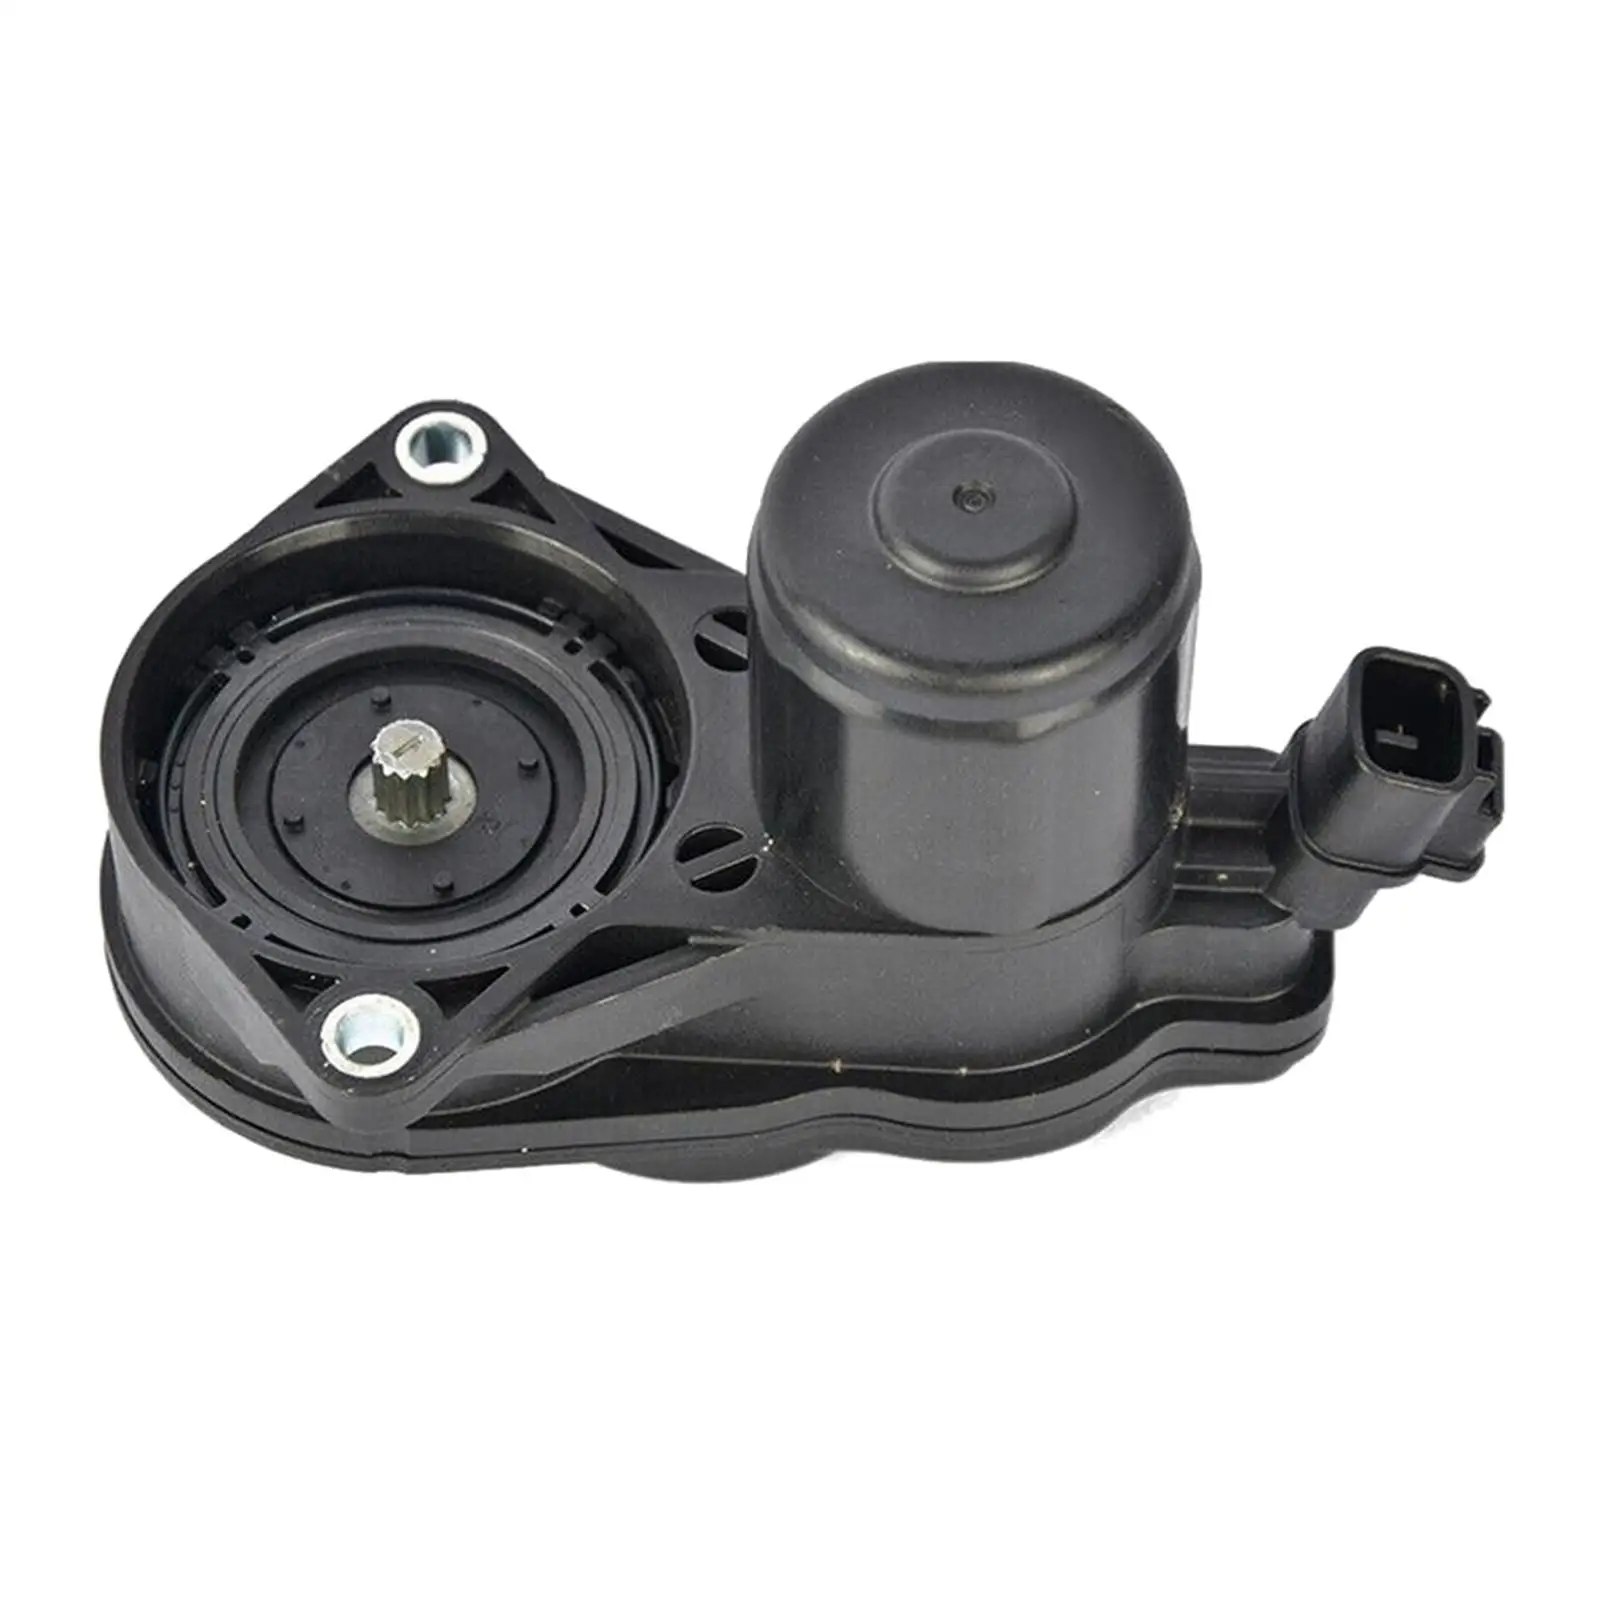 Parking Brake Actuator Automotive Replacement Part Replaces 46310-33010 for Toyota for sienna Avalon for camry Durable